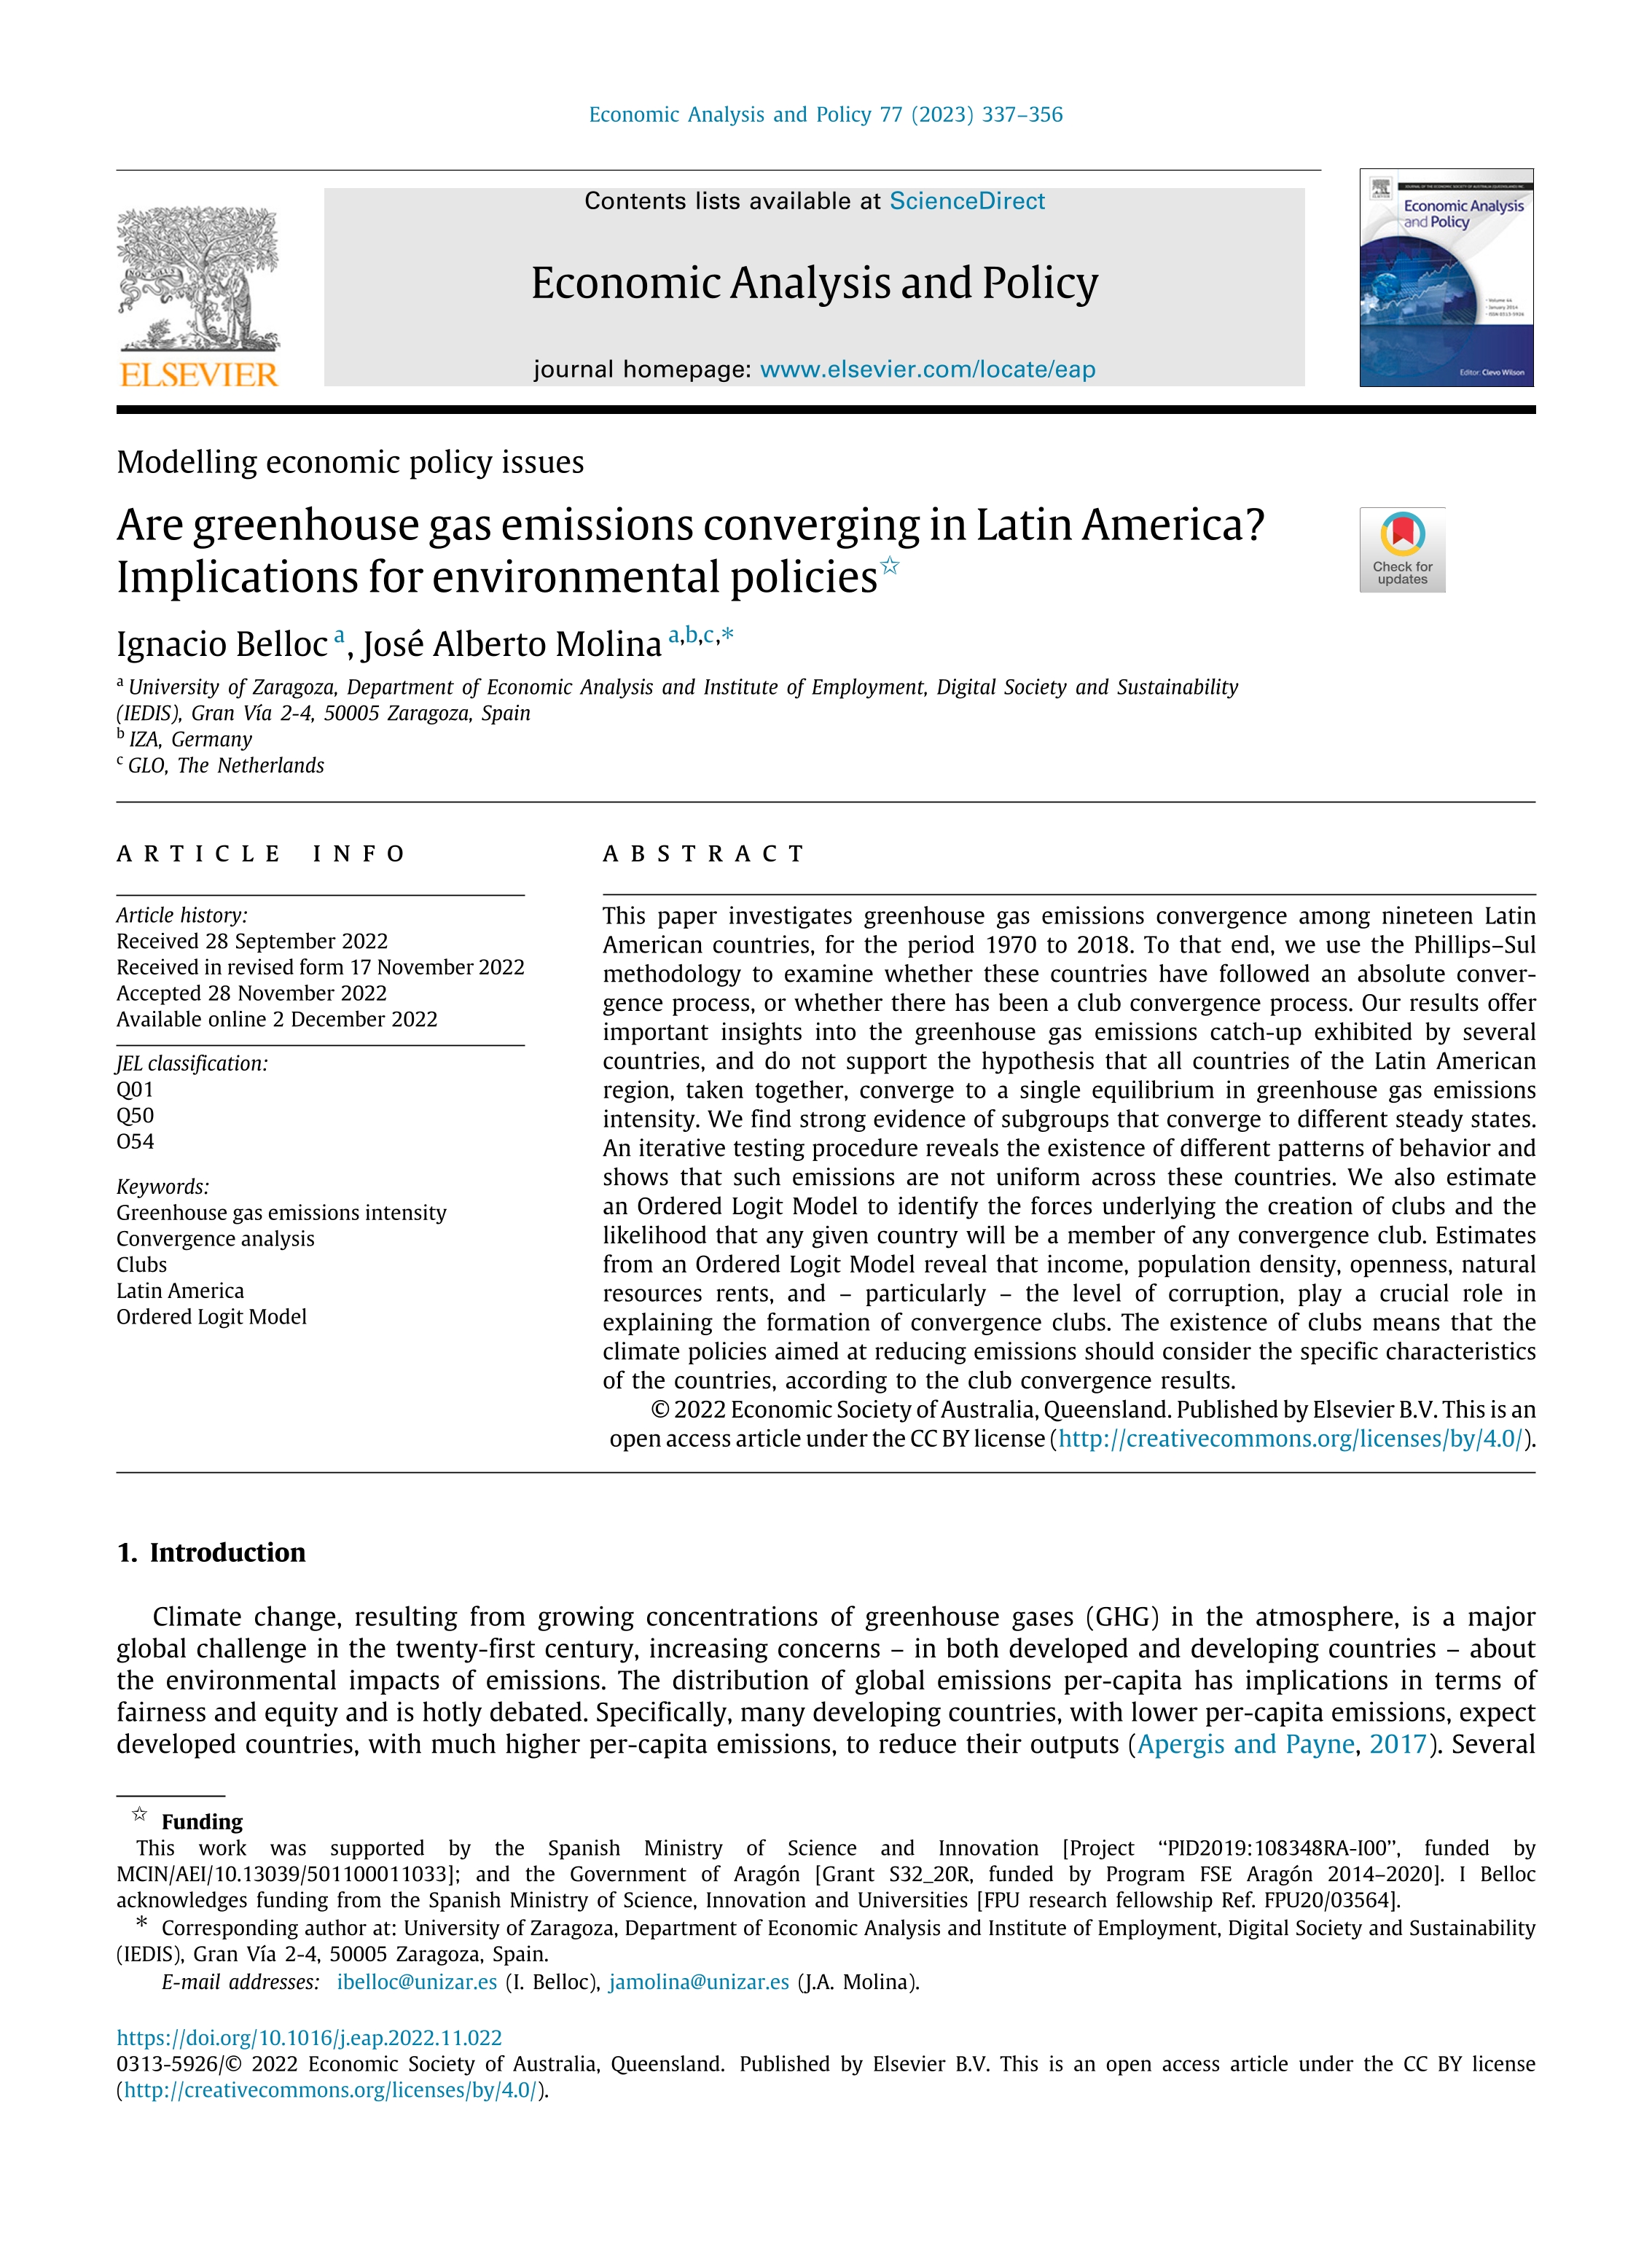 Are greenhouse gas emissions converging in Latin America? Implications for environmental policies